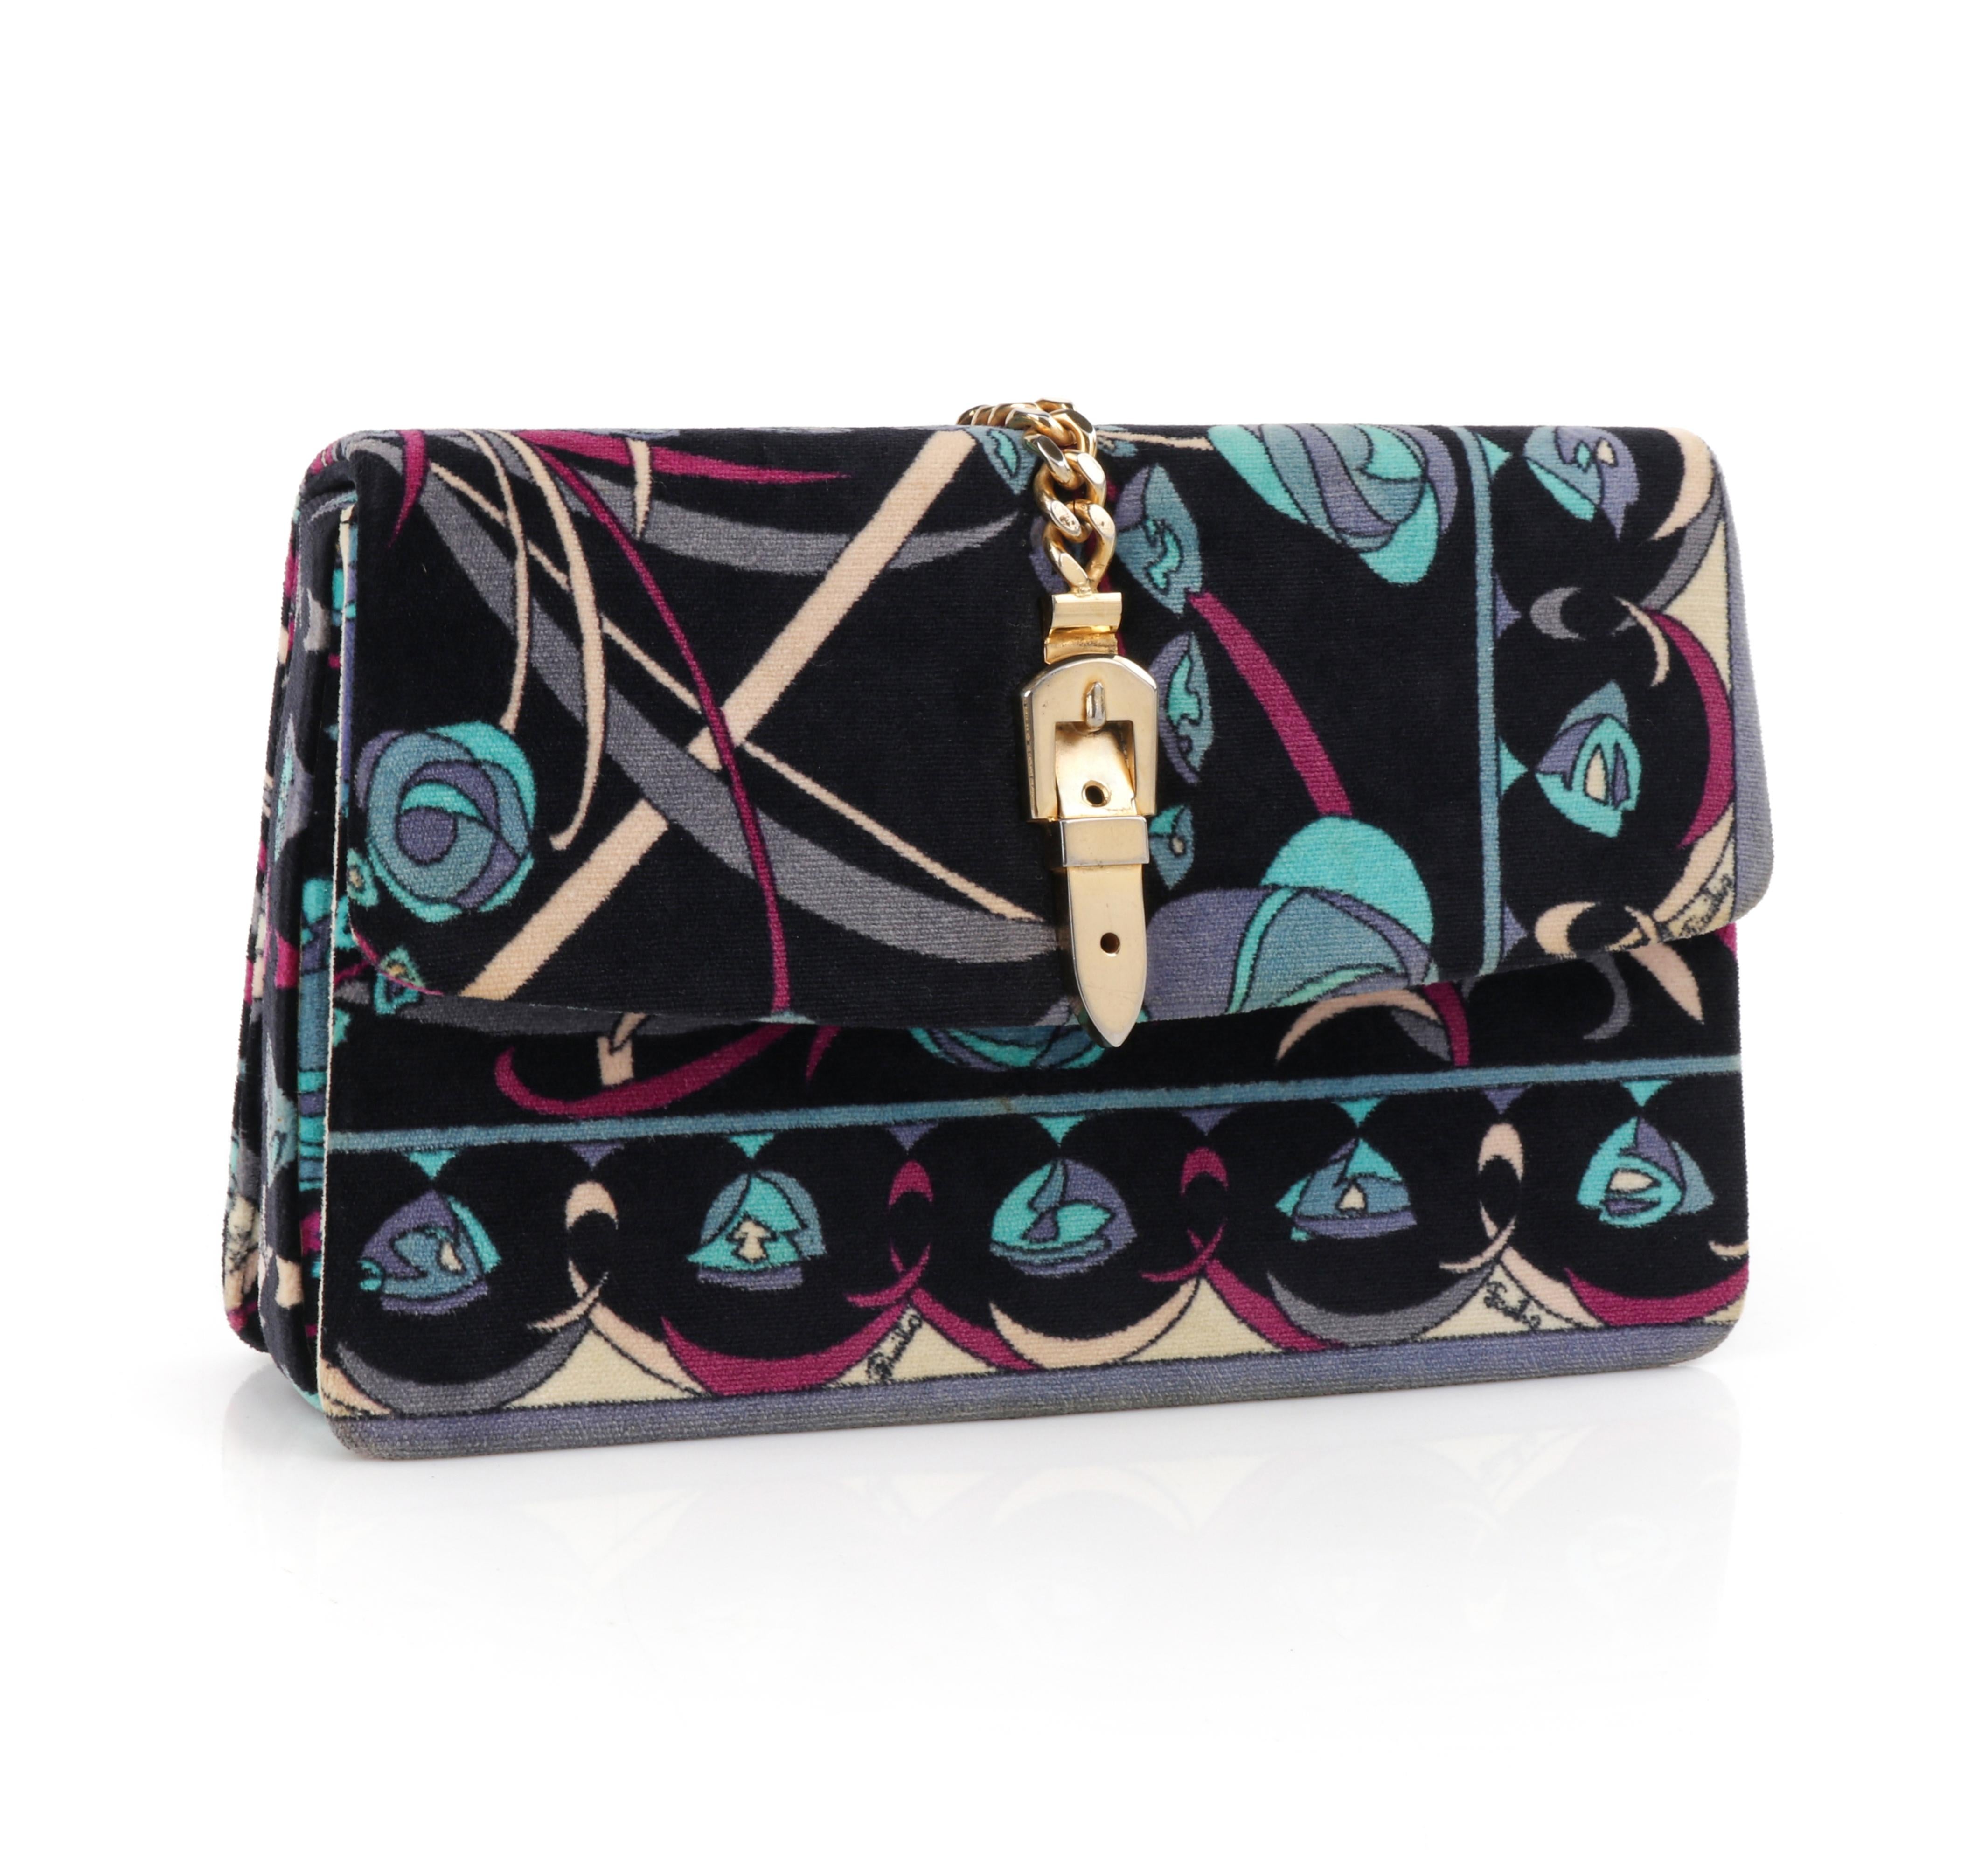 EMILIO PUCCI c.1970’s Velvet Geometric Floral Blue Fold Over Gold Chain Clutch
 
Brand / Manufacturer: Emilio Pucci
Circa: 1970’s 
Style: Clutch
Color(s): Shades of blue, purple, pink, and ivory
Lined: Yes
Unmarked Fabric Content (feel of): Low pile